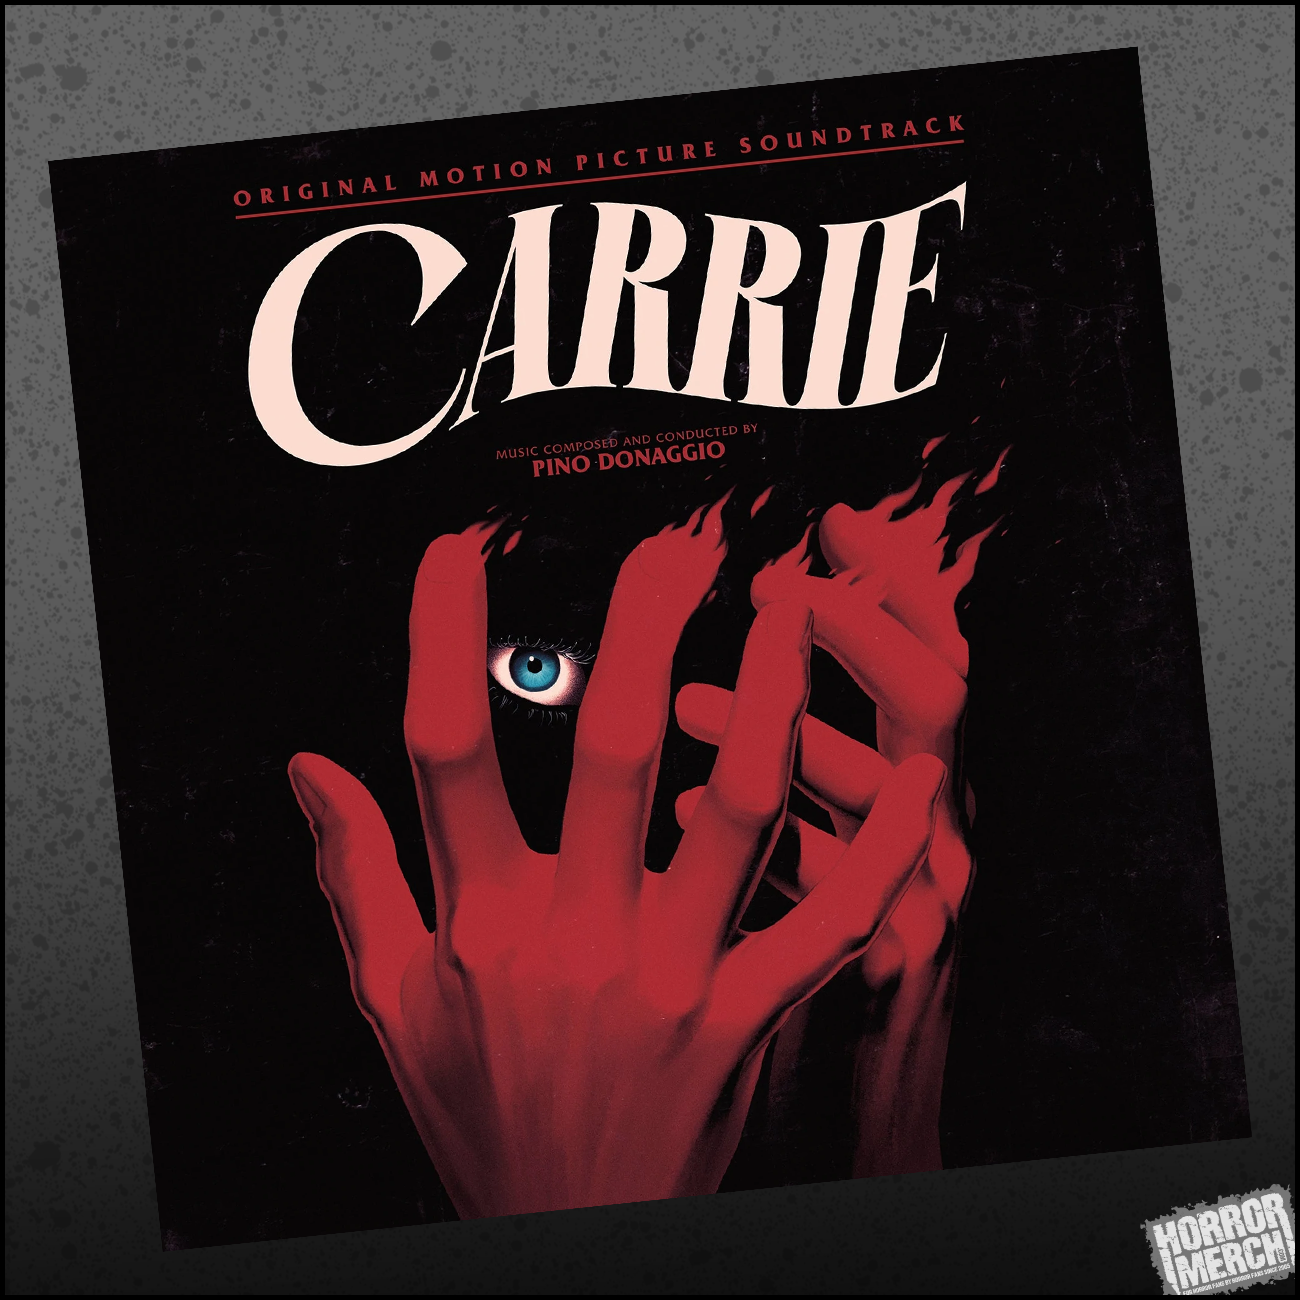 Carrie [Soundtrack] - Free Shipping!